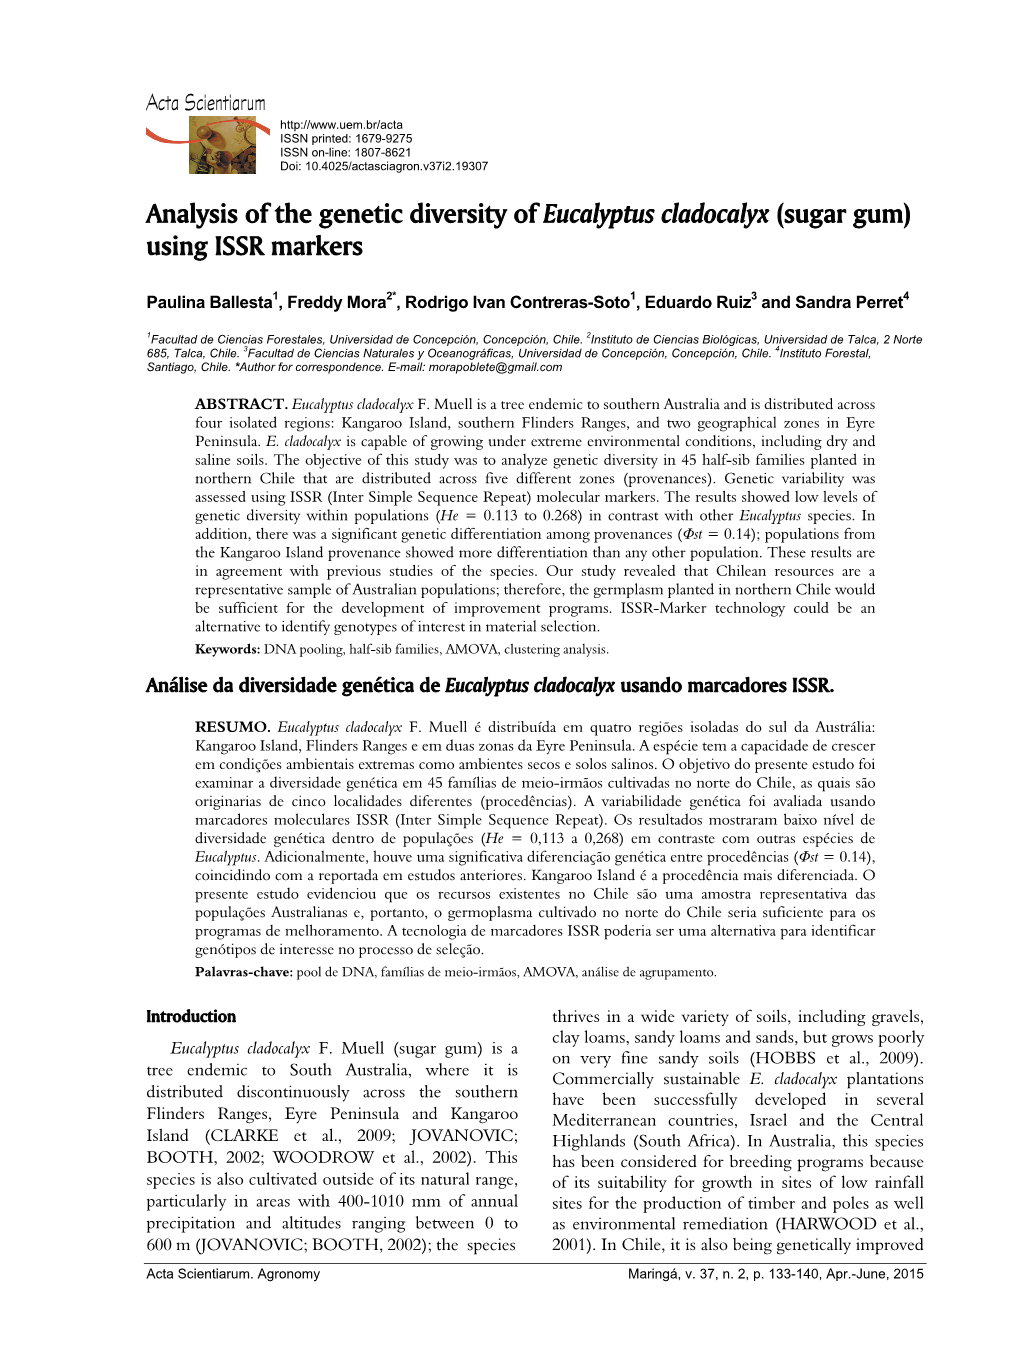 Analysis of the Genetic Diversity of Eucalyptus Cladocalyx (Sugar Gum) Using ISSR Markers